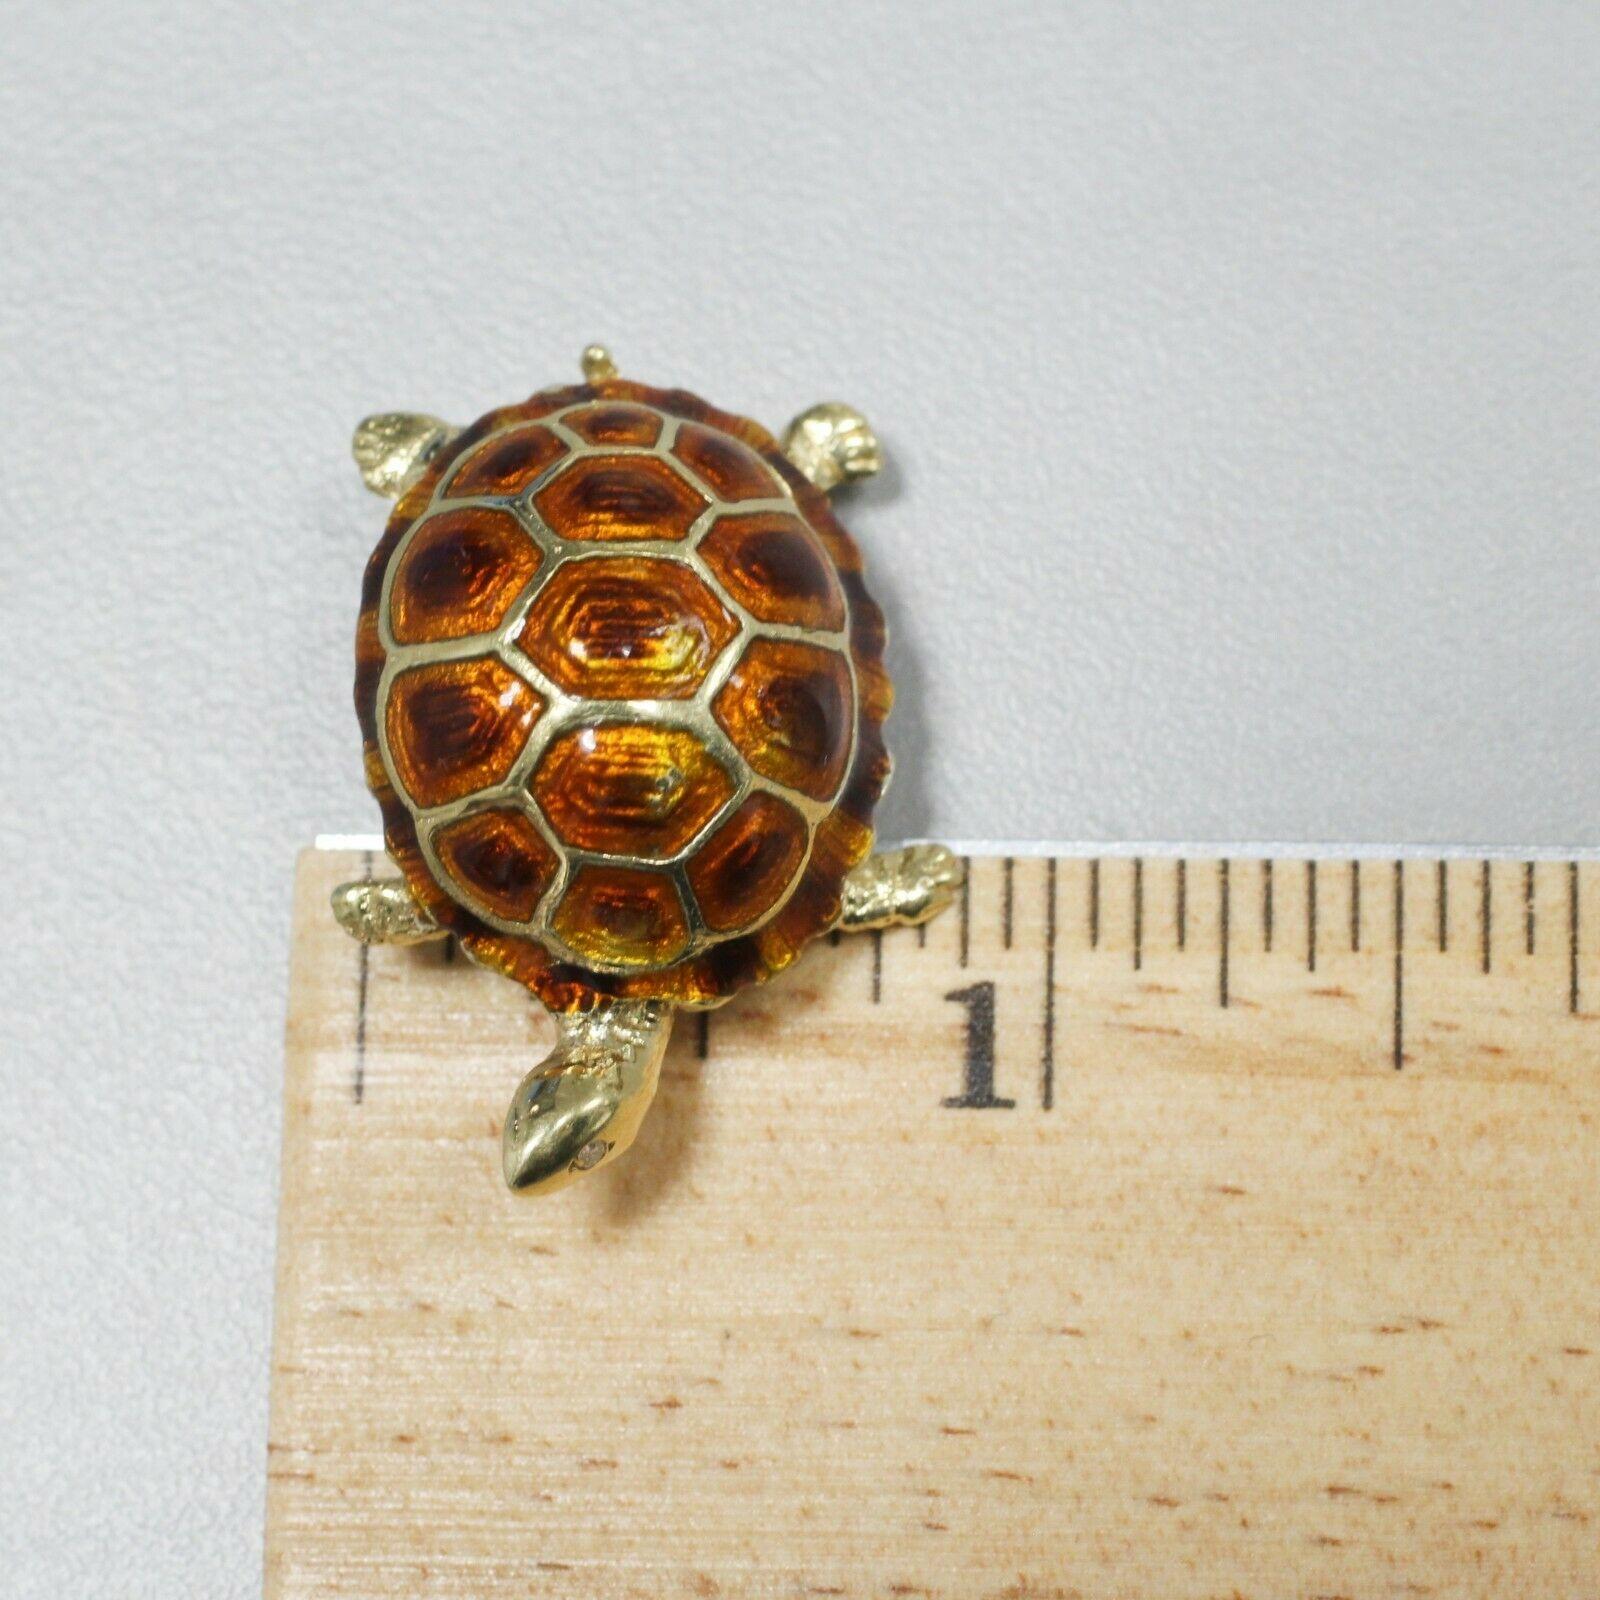 14 Karat Yellow Gold Turtle Brooch with Single Cut Diamond Eyes In Excellent Condition For Sale In Los Angeles, CA